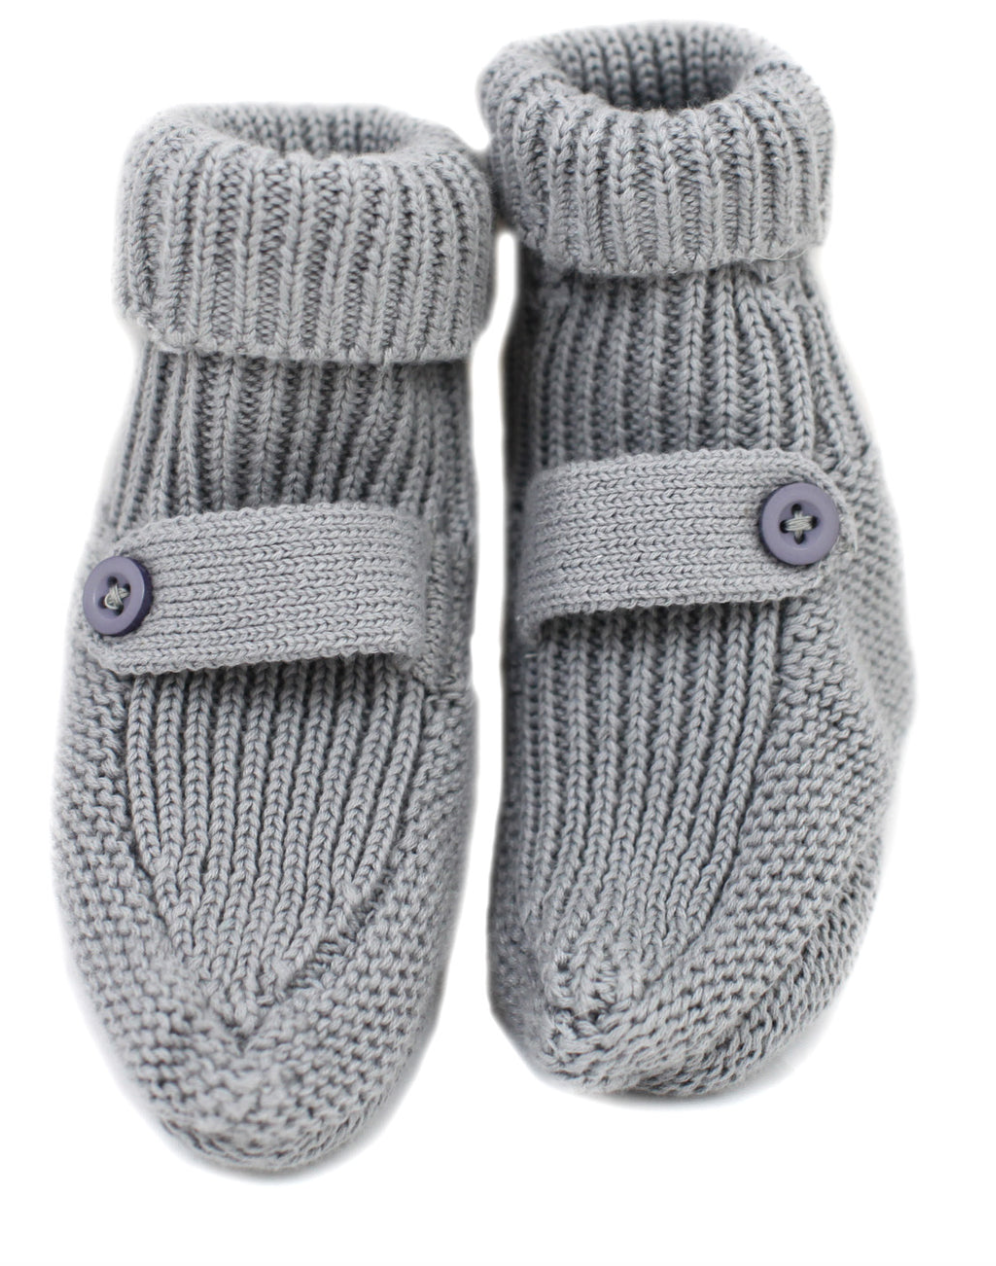 Knit Baby Bootie- Grey